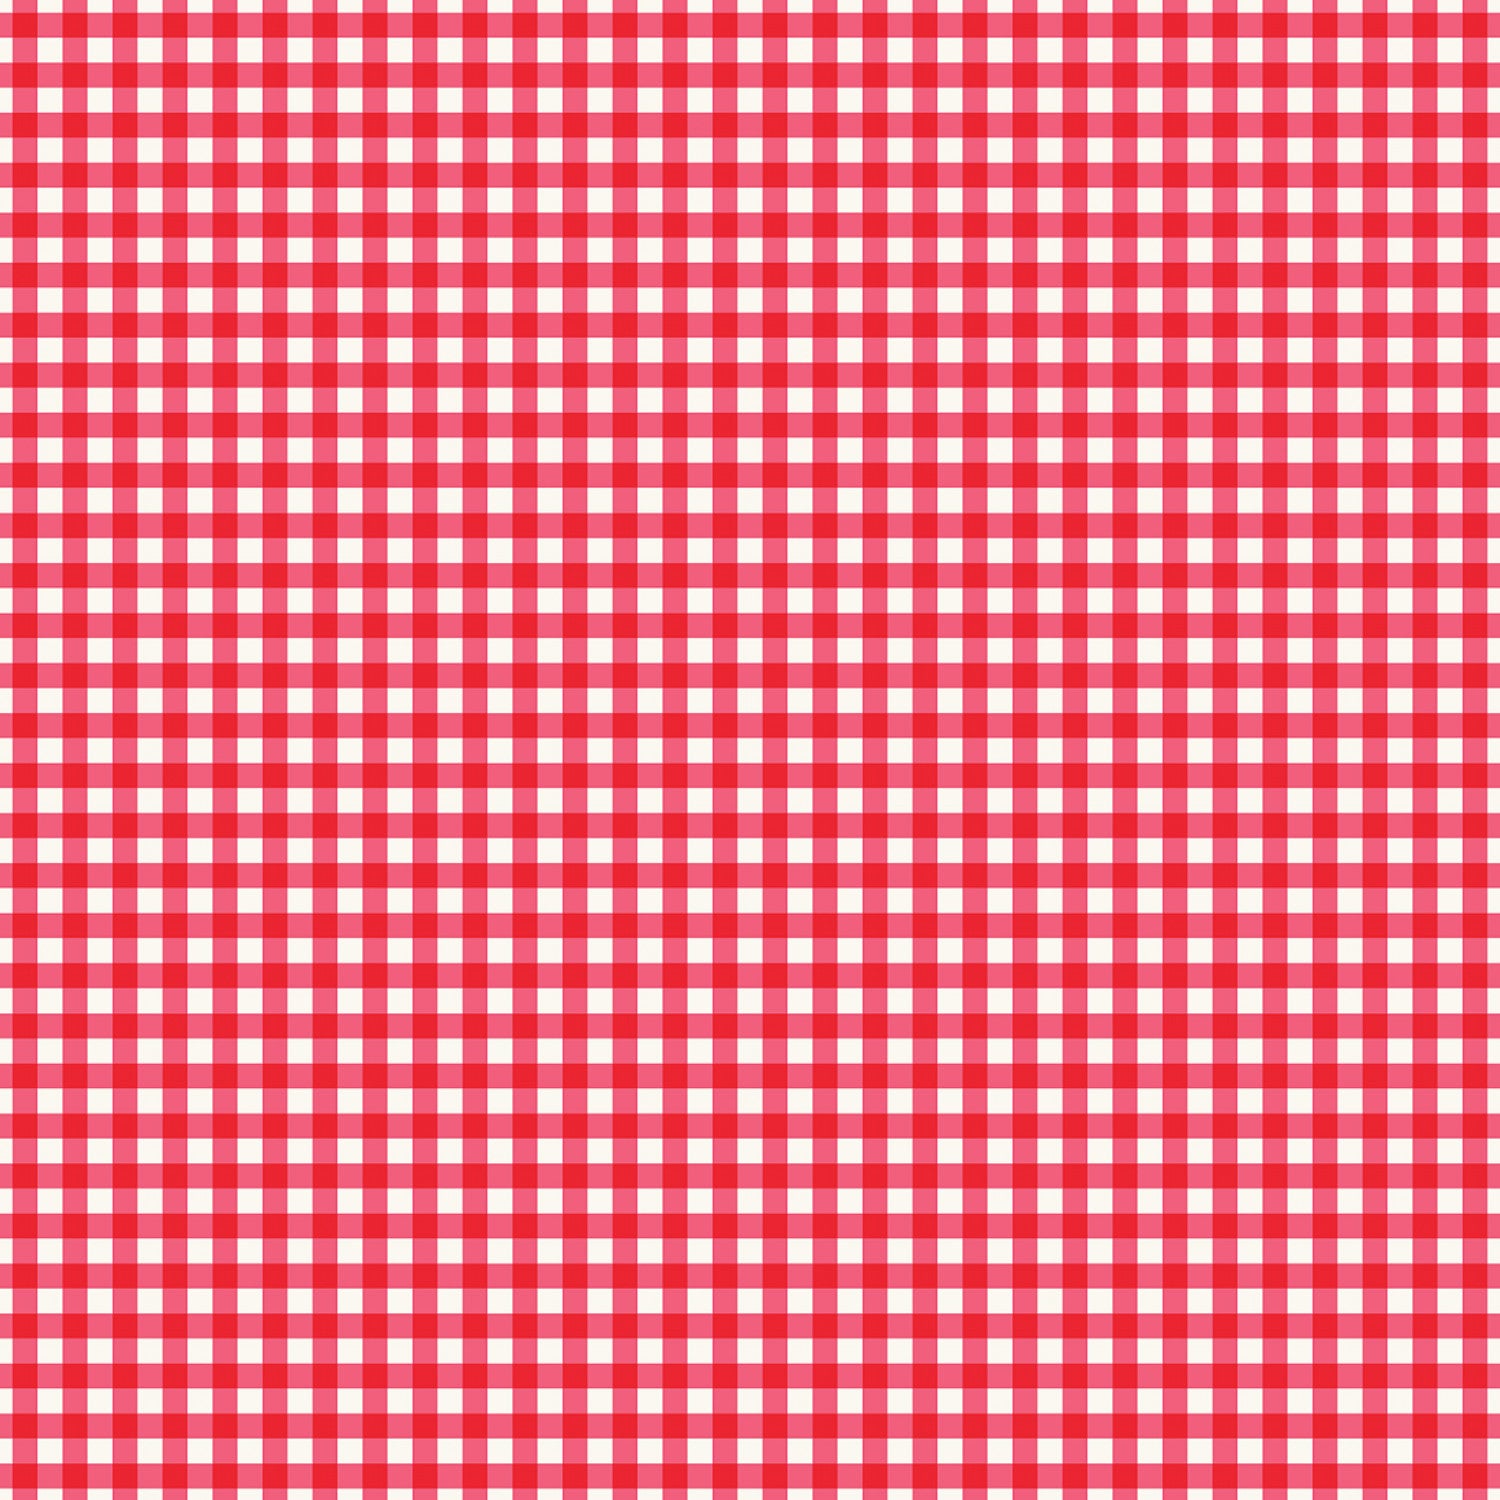 Picnic Florals - Gingham Red by My Mind's Eye for Riley Blake